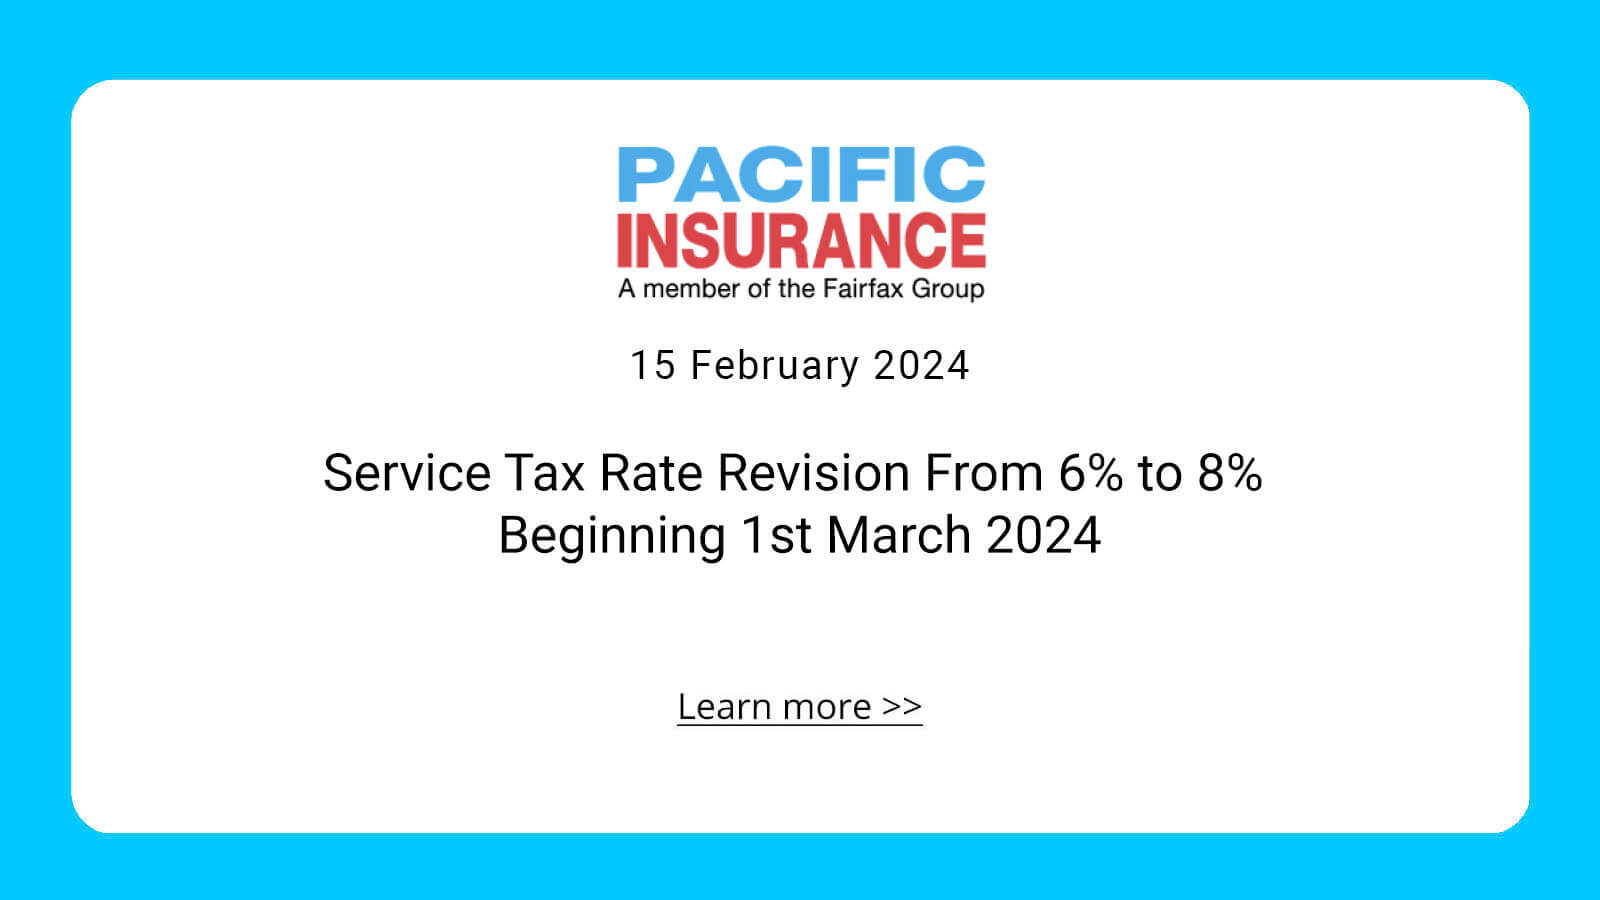 Service Tax Rate Revision From 6% to 8% Beginning 1st March 2024